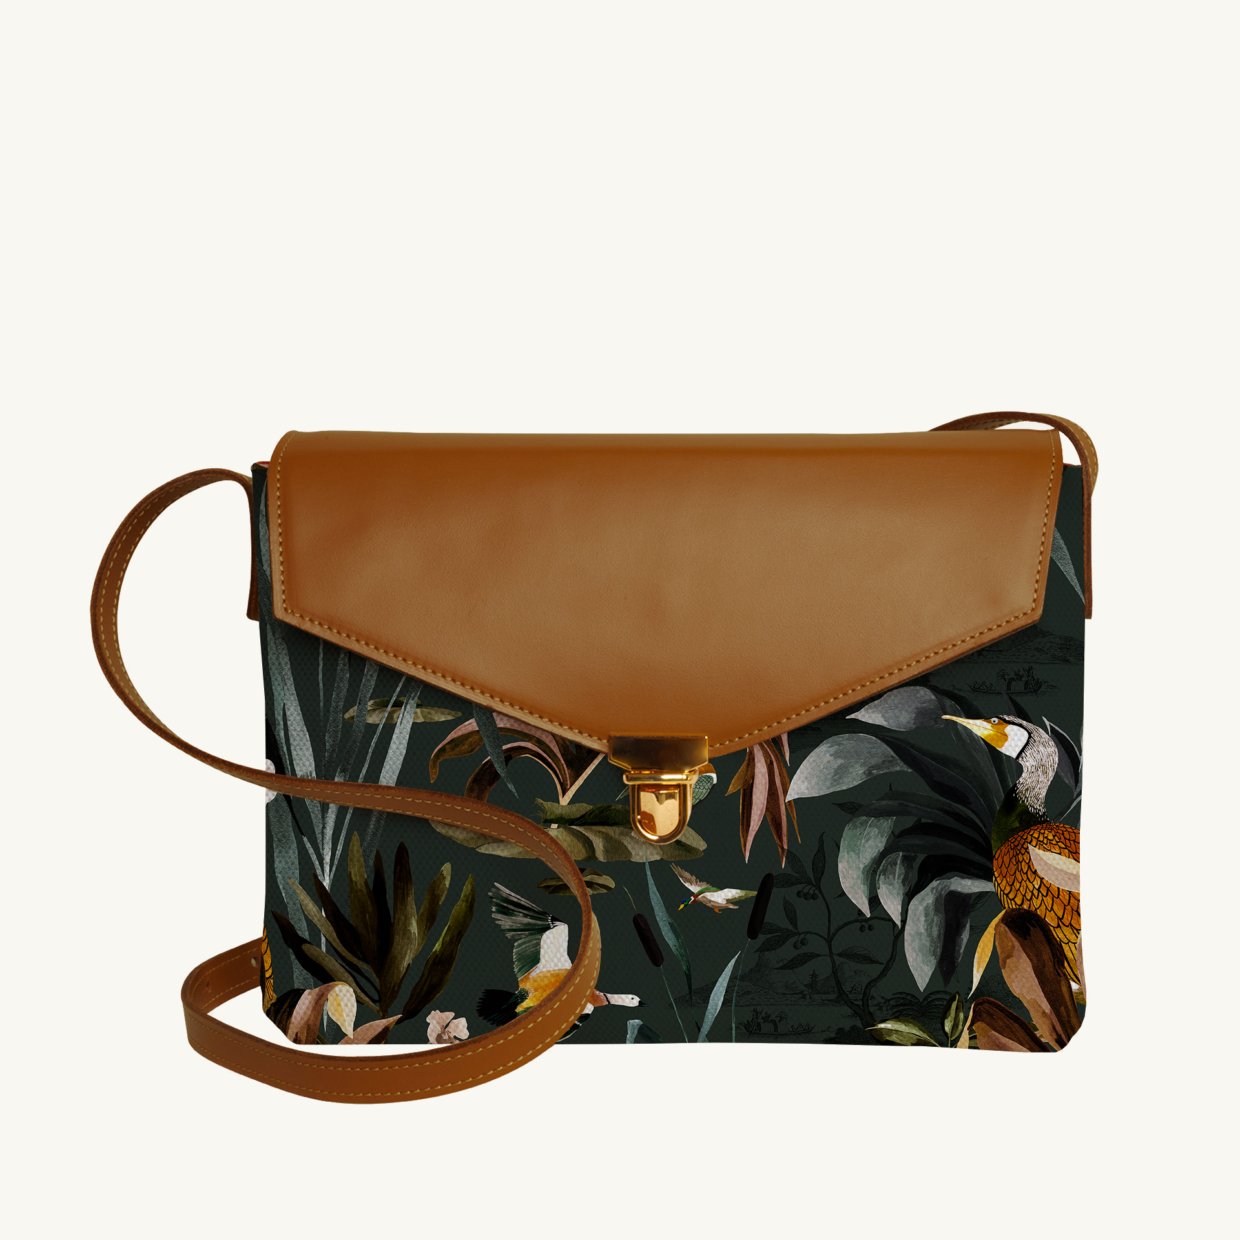 Purse Sauvage N°26 Green - Camel leather